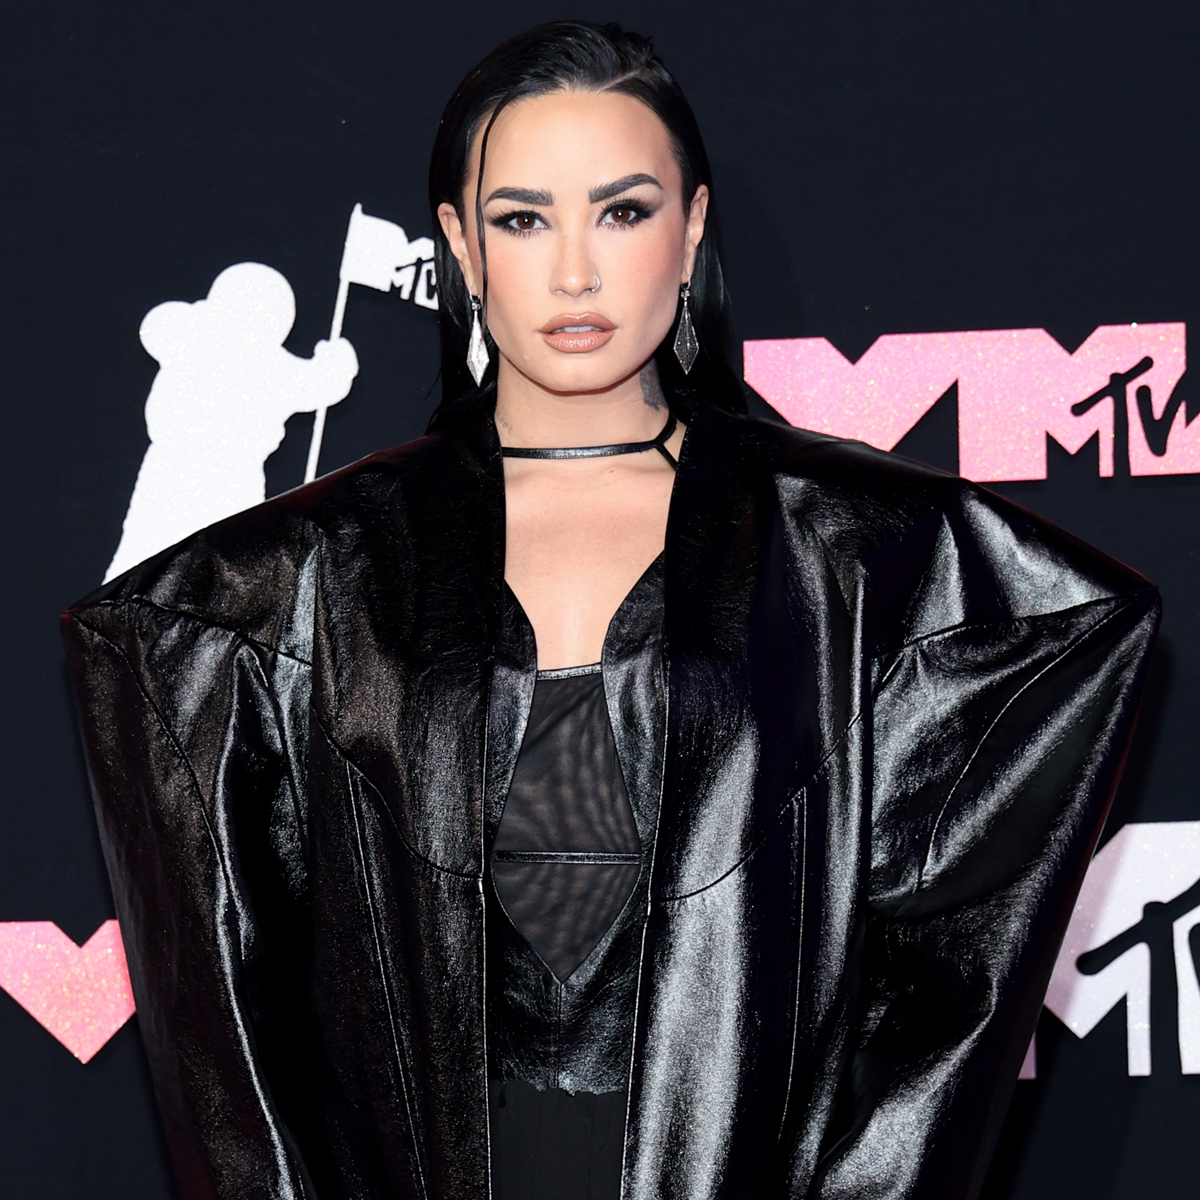 Demi Lovato Performs 'Give Your Heart a Break' in a Boot at the